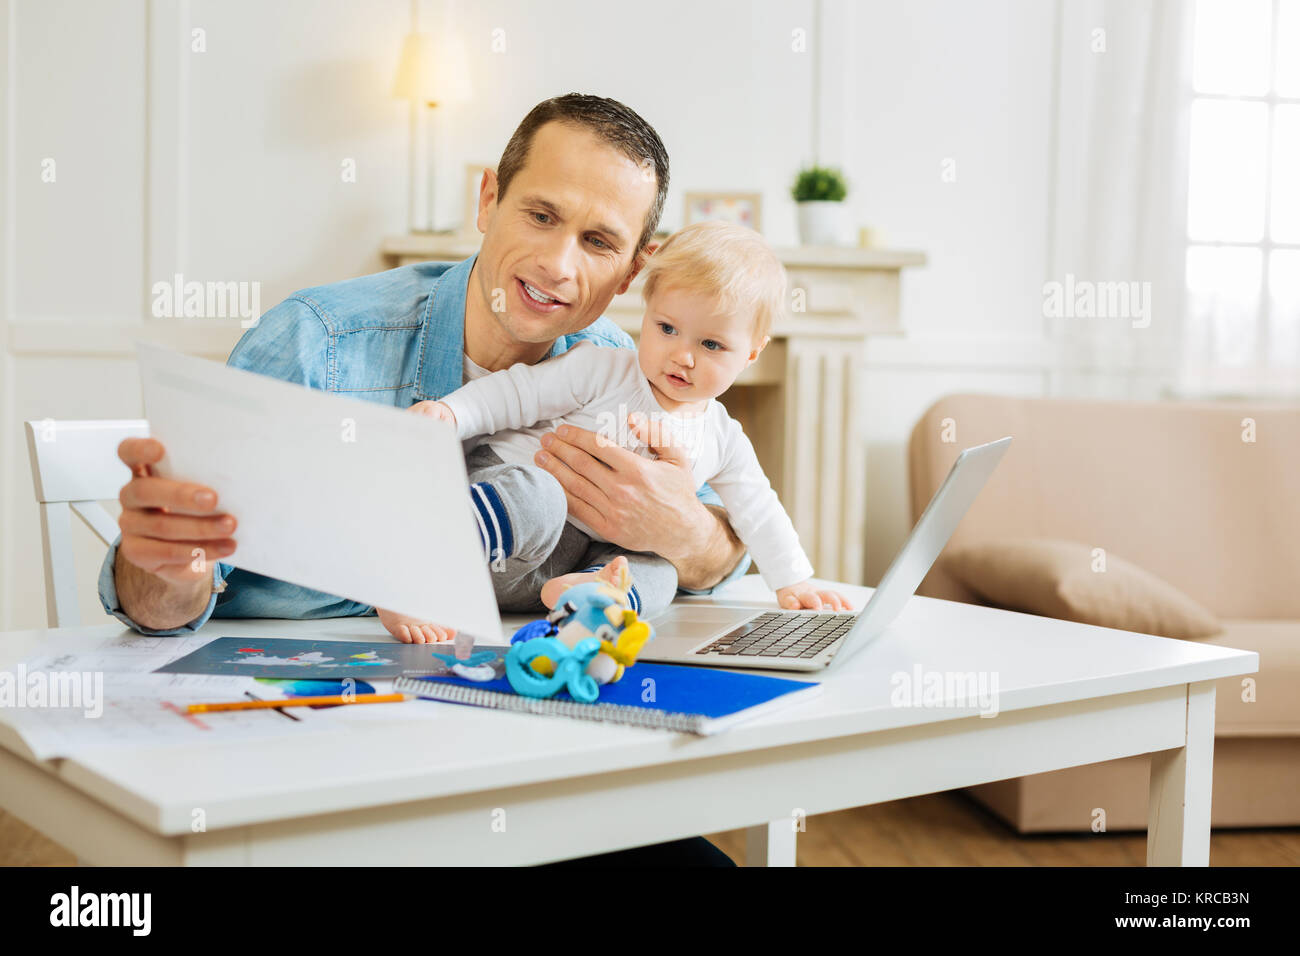 Serious attentive man showing his project to a baby and feeling excited Stock Photo